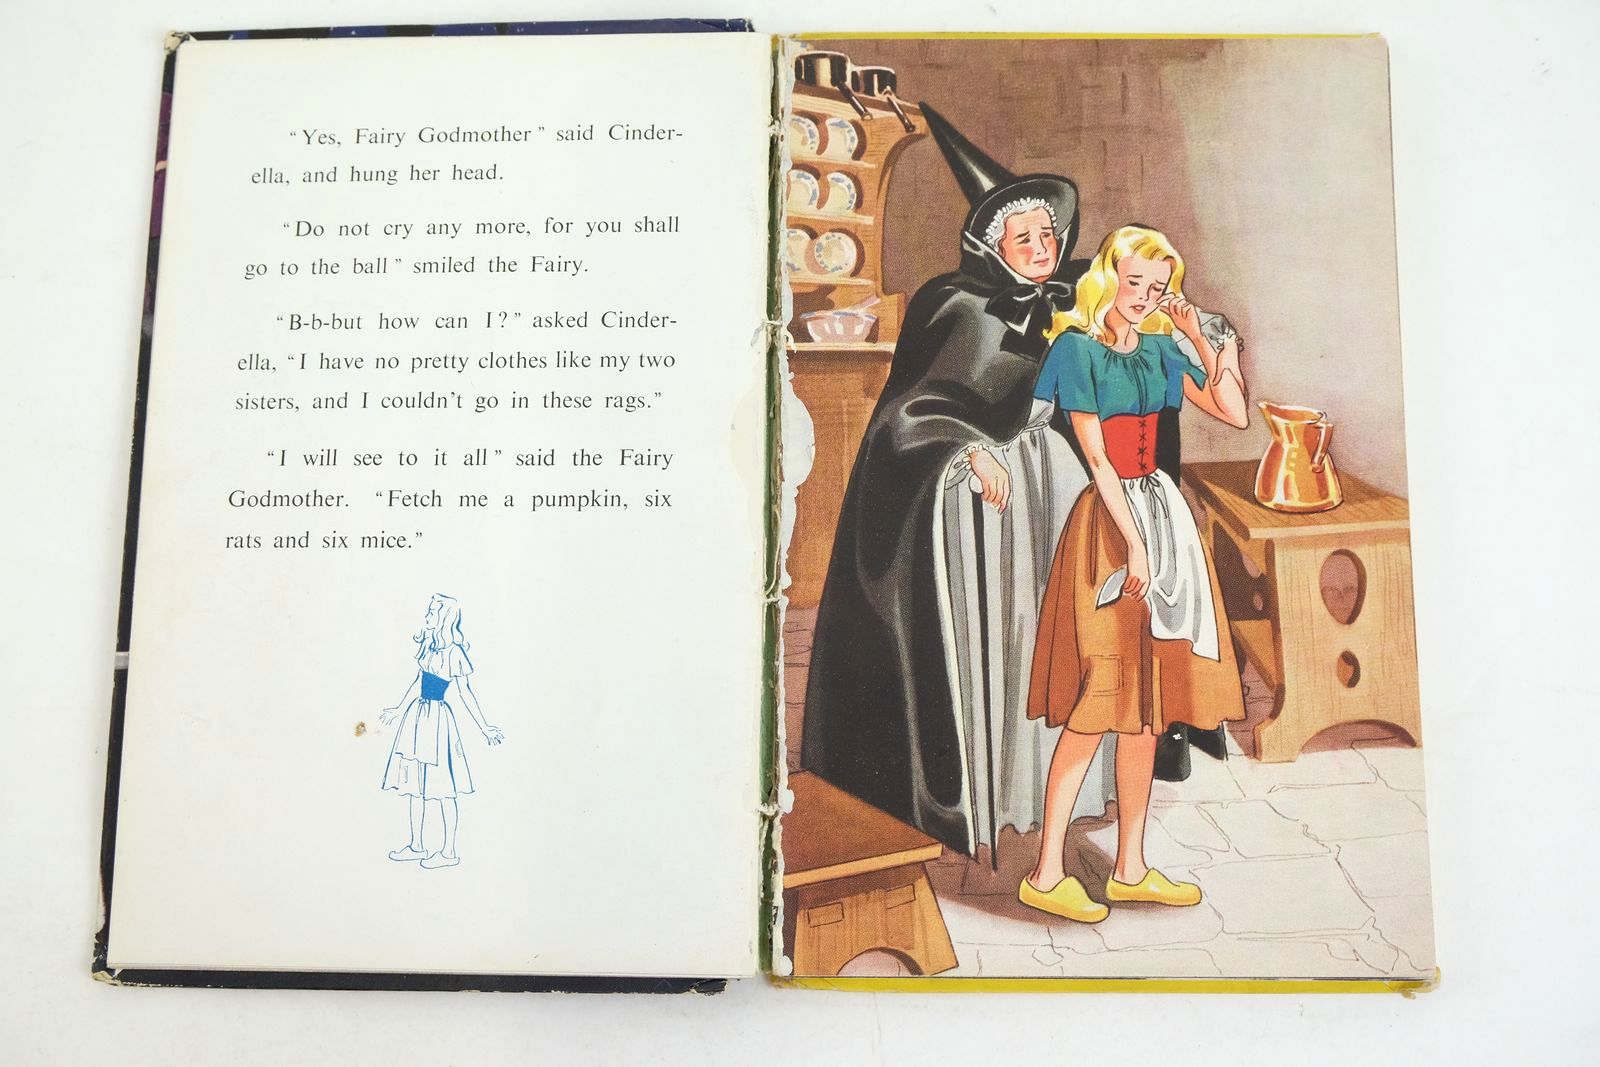 Photo of THE STORY OF CINDERELLA written by Levy, Muriel illustrated by Bowmar, Evelyn published by Wills & Hepworth Ltd. (STOCK CODE: 1320093)  for sale by Stella & Rose's Books